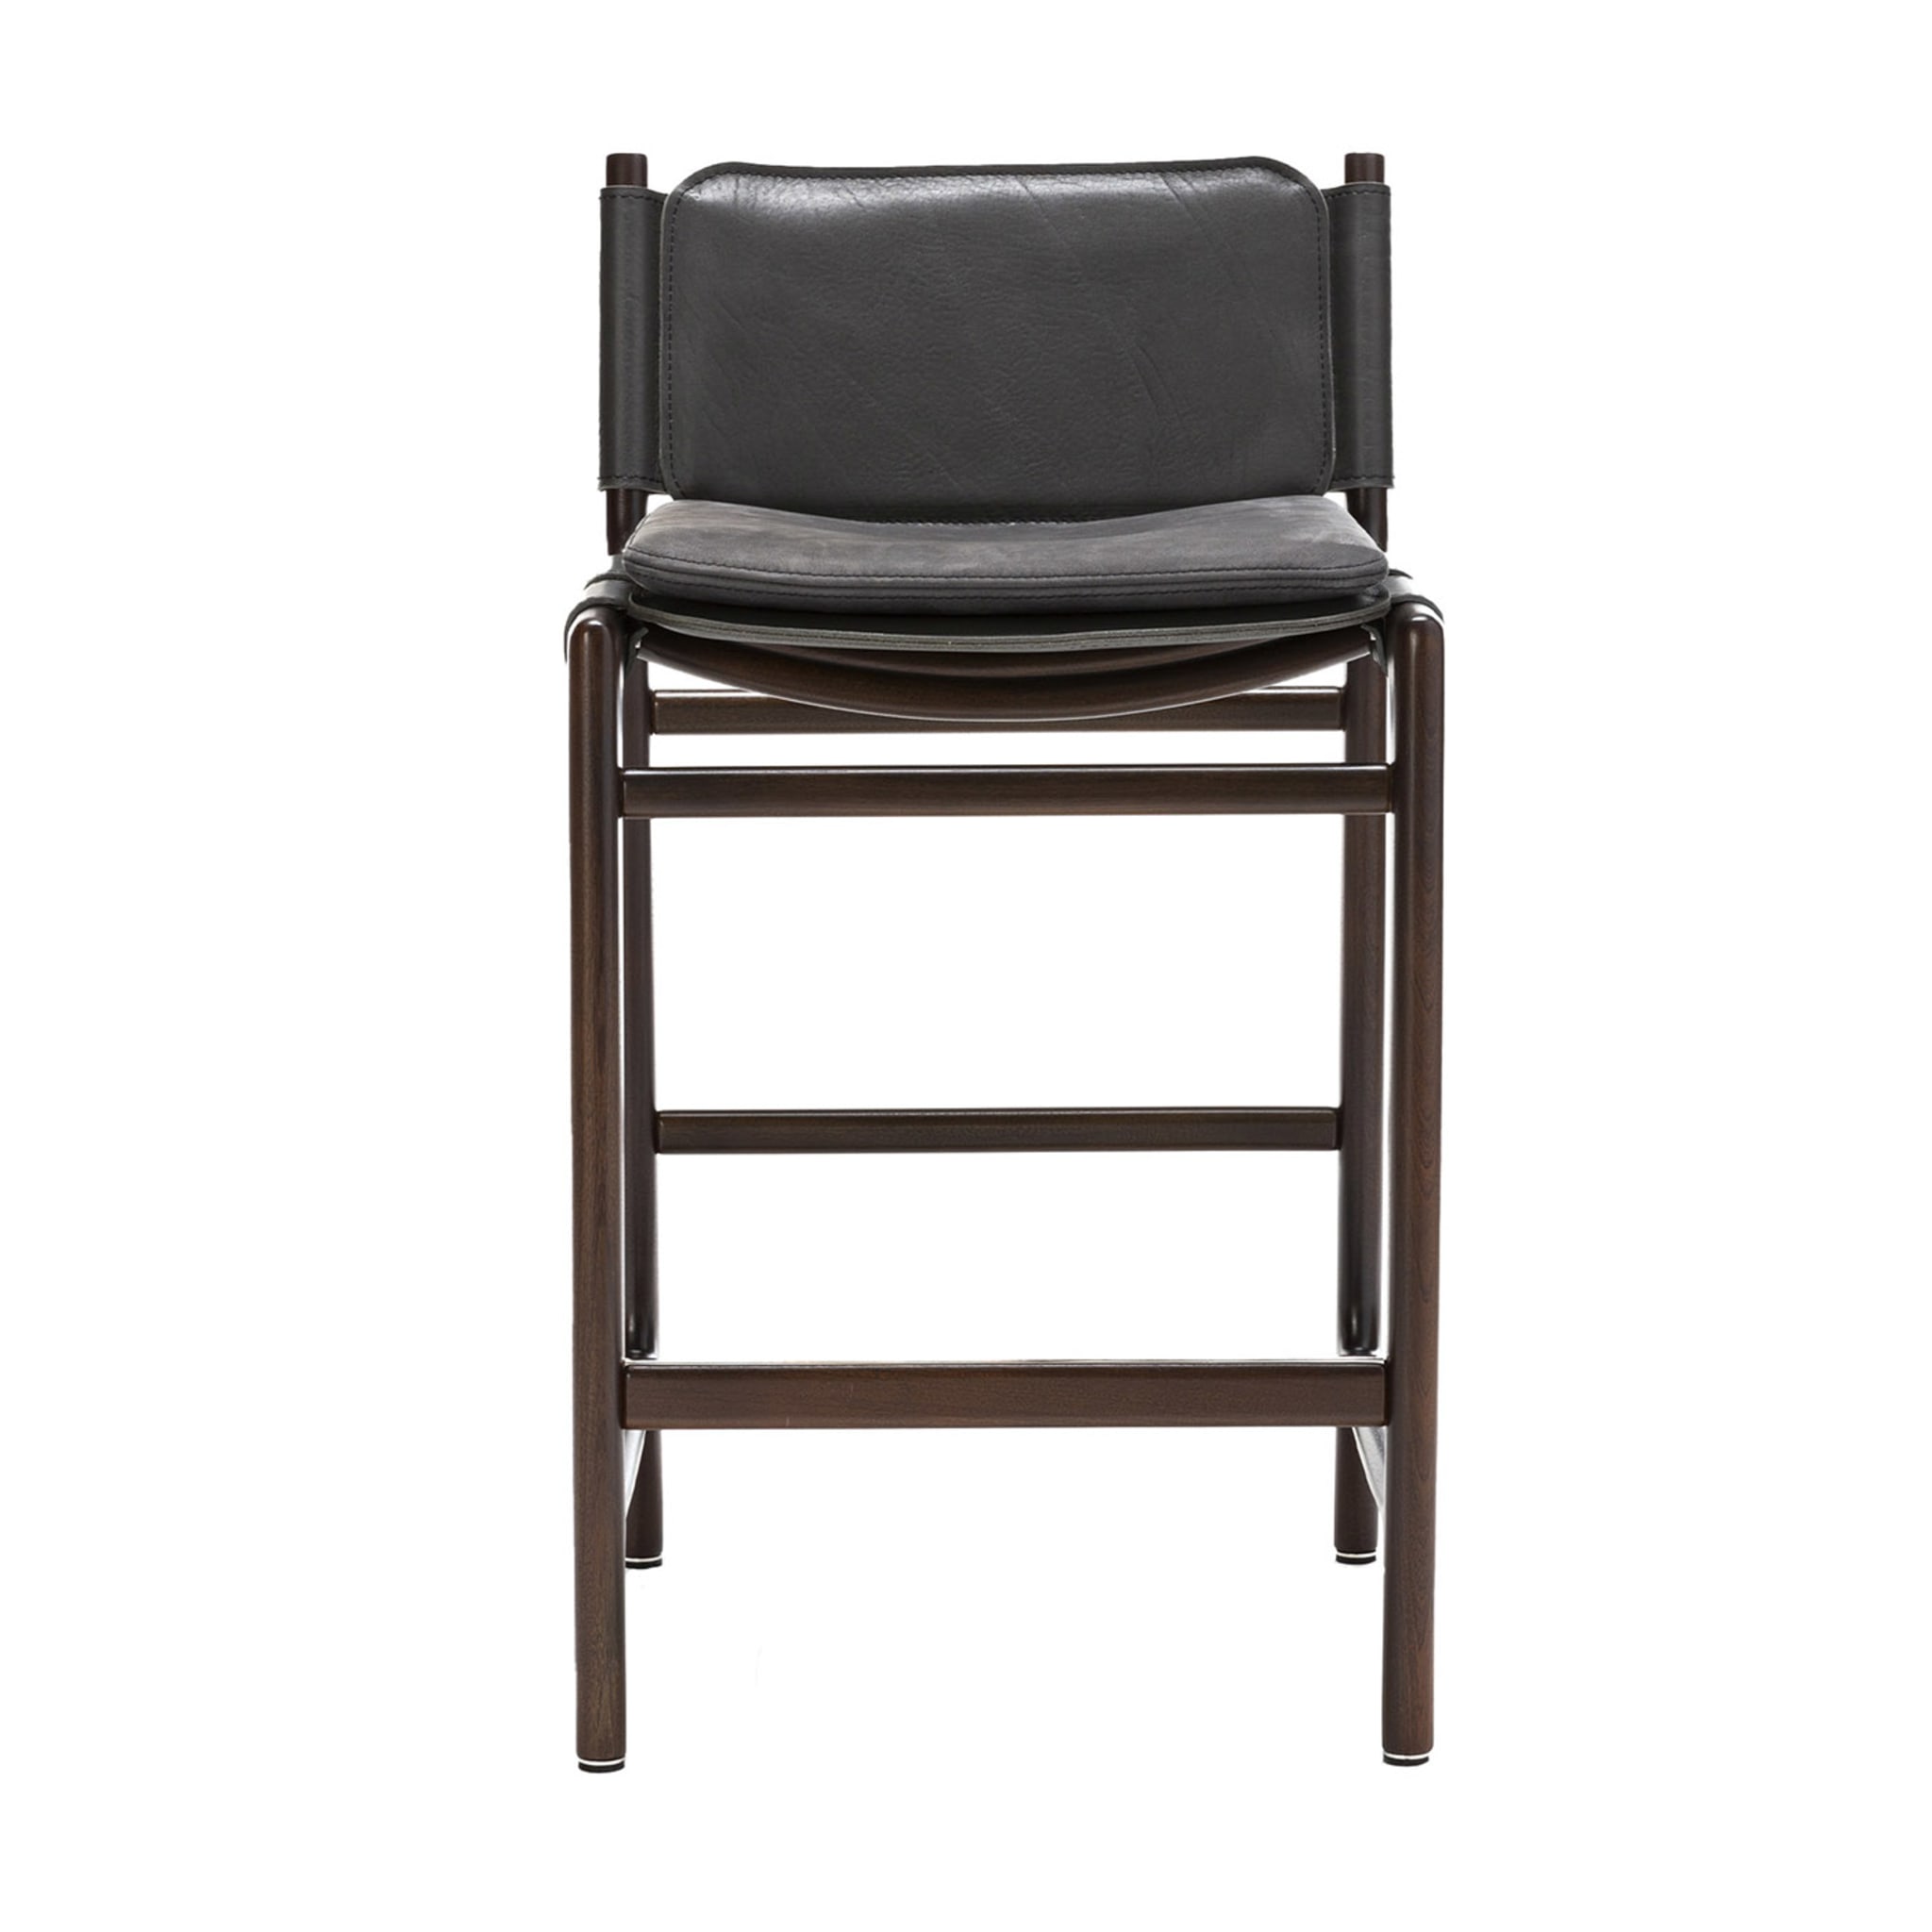 Levante Dark Leather Stool by Massimo Castagna - Main view